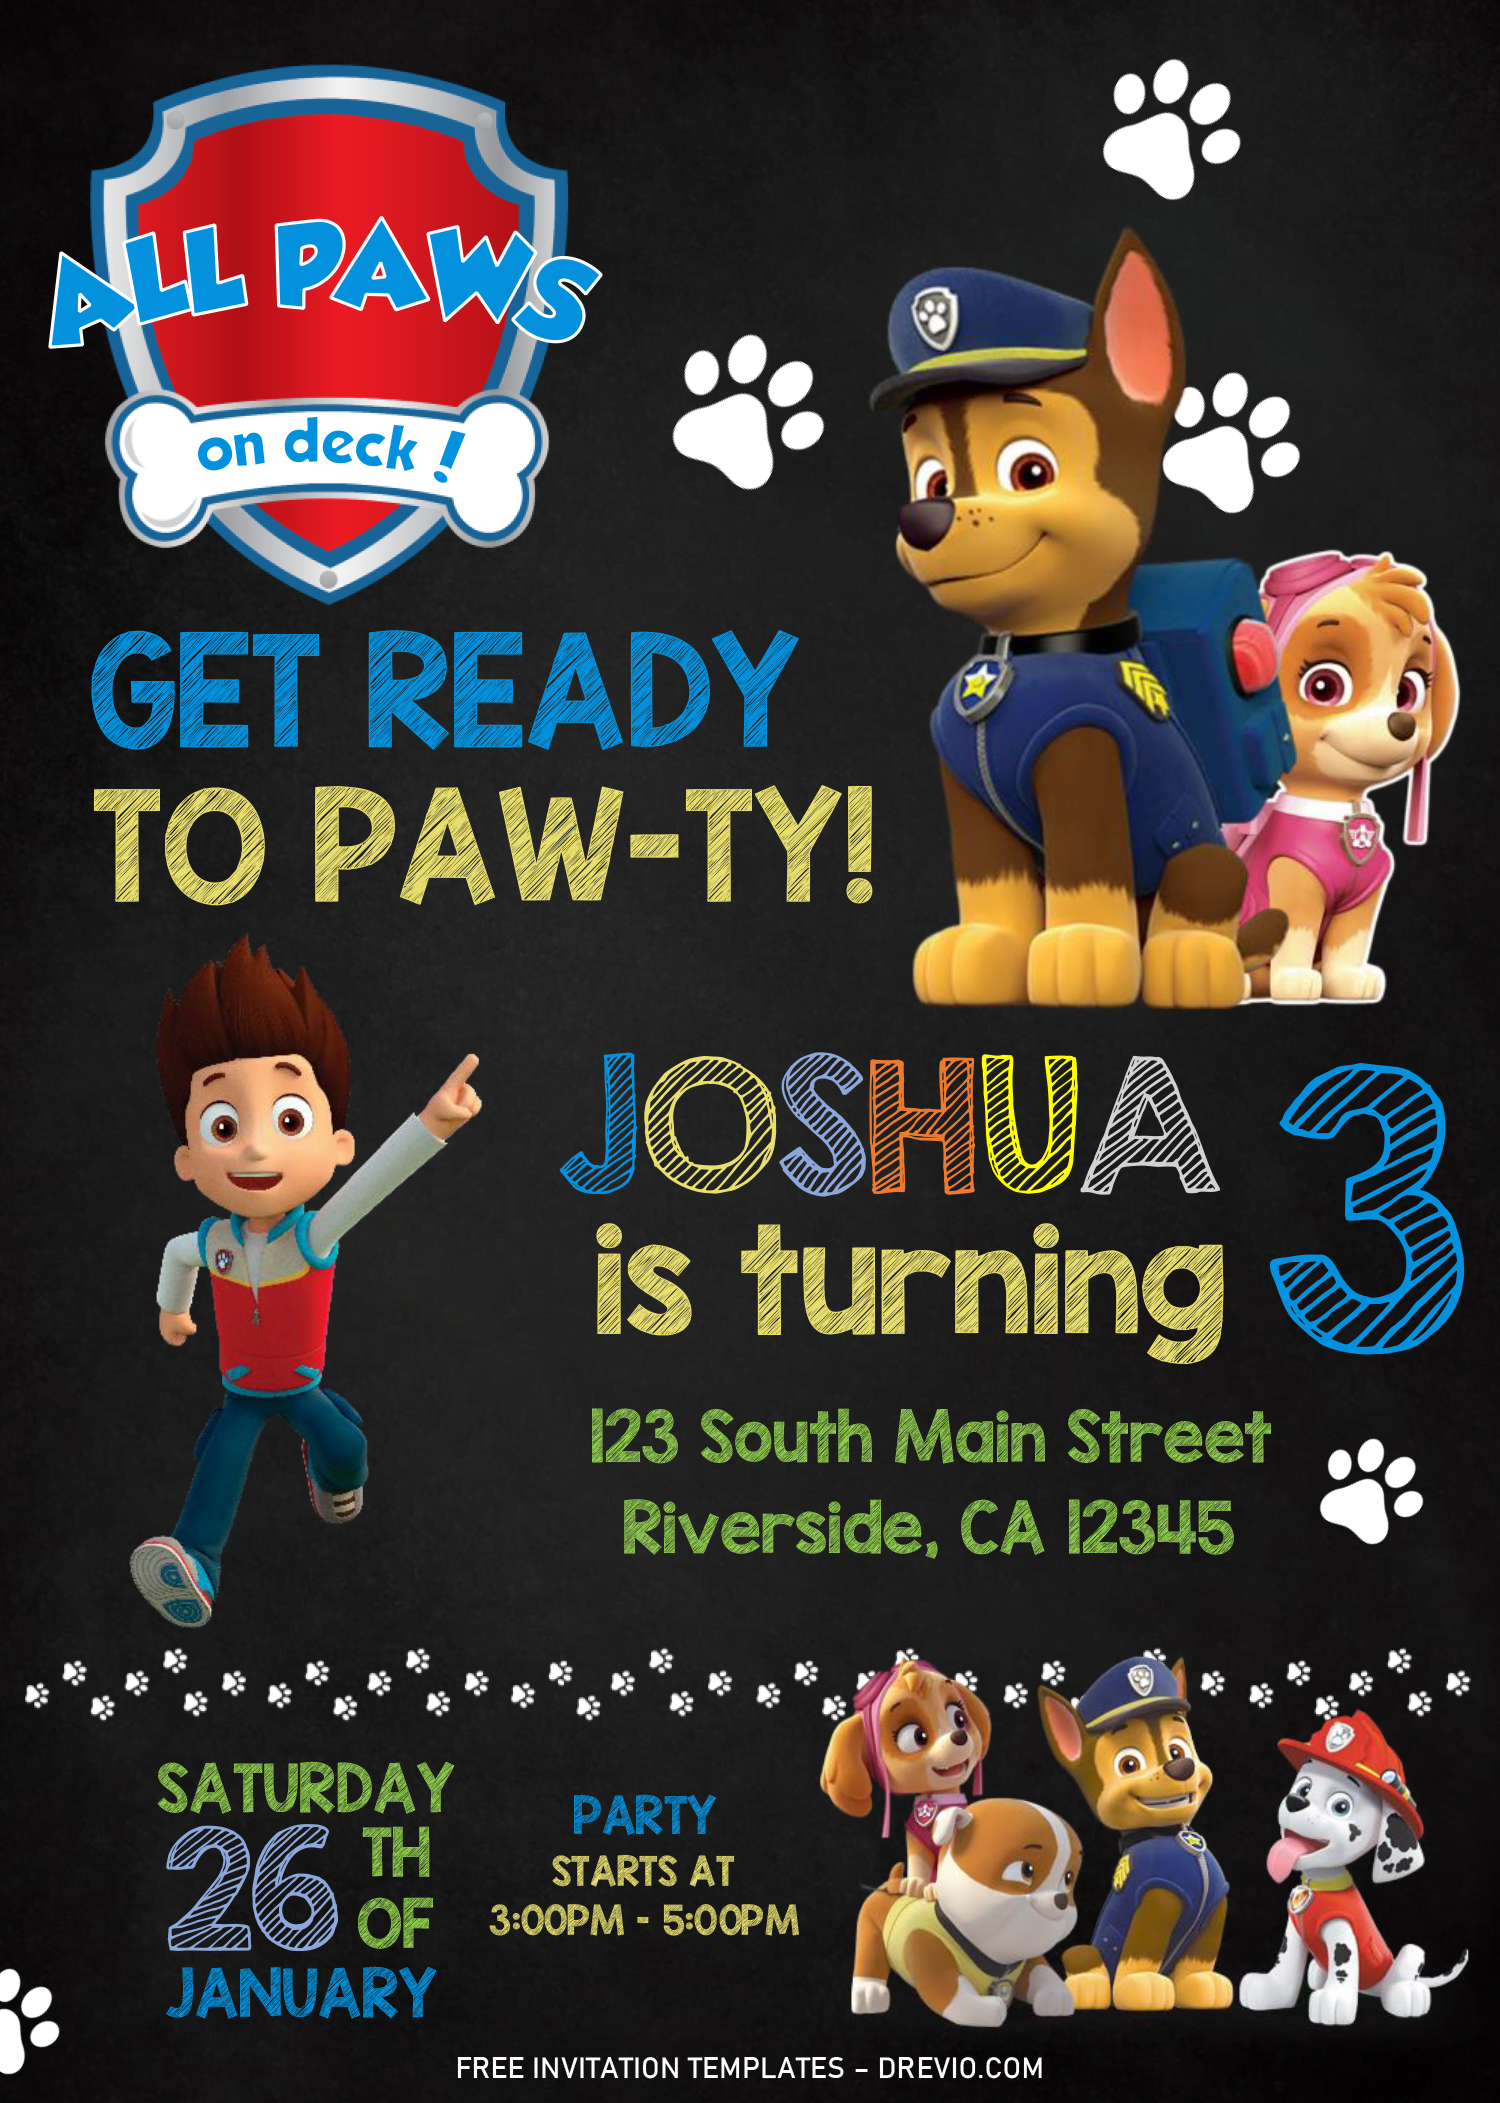 Free Chalkboard Paw Patrol Invitation Templates Editable With Ms Word Download Hundreds Free Printable Birthday Invitation Templates